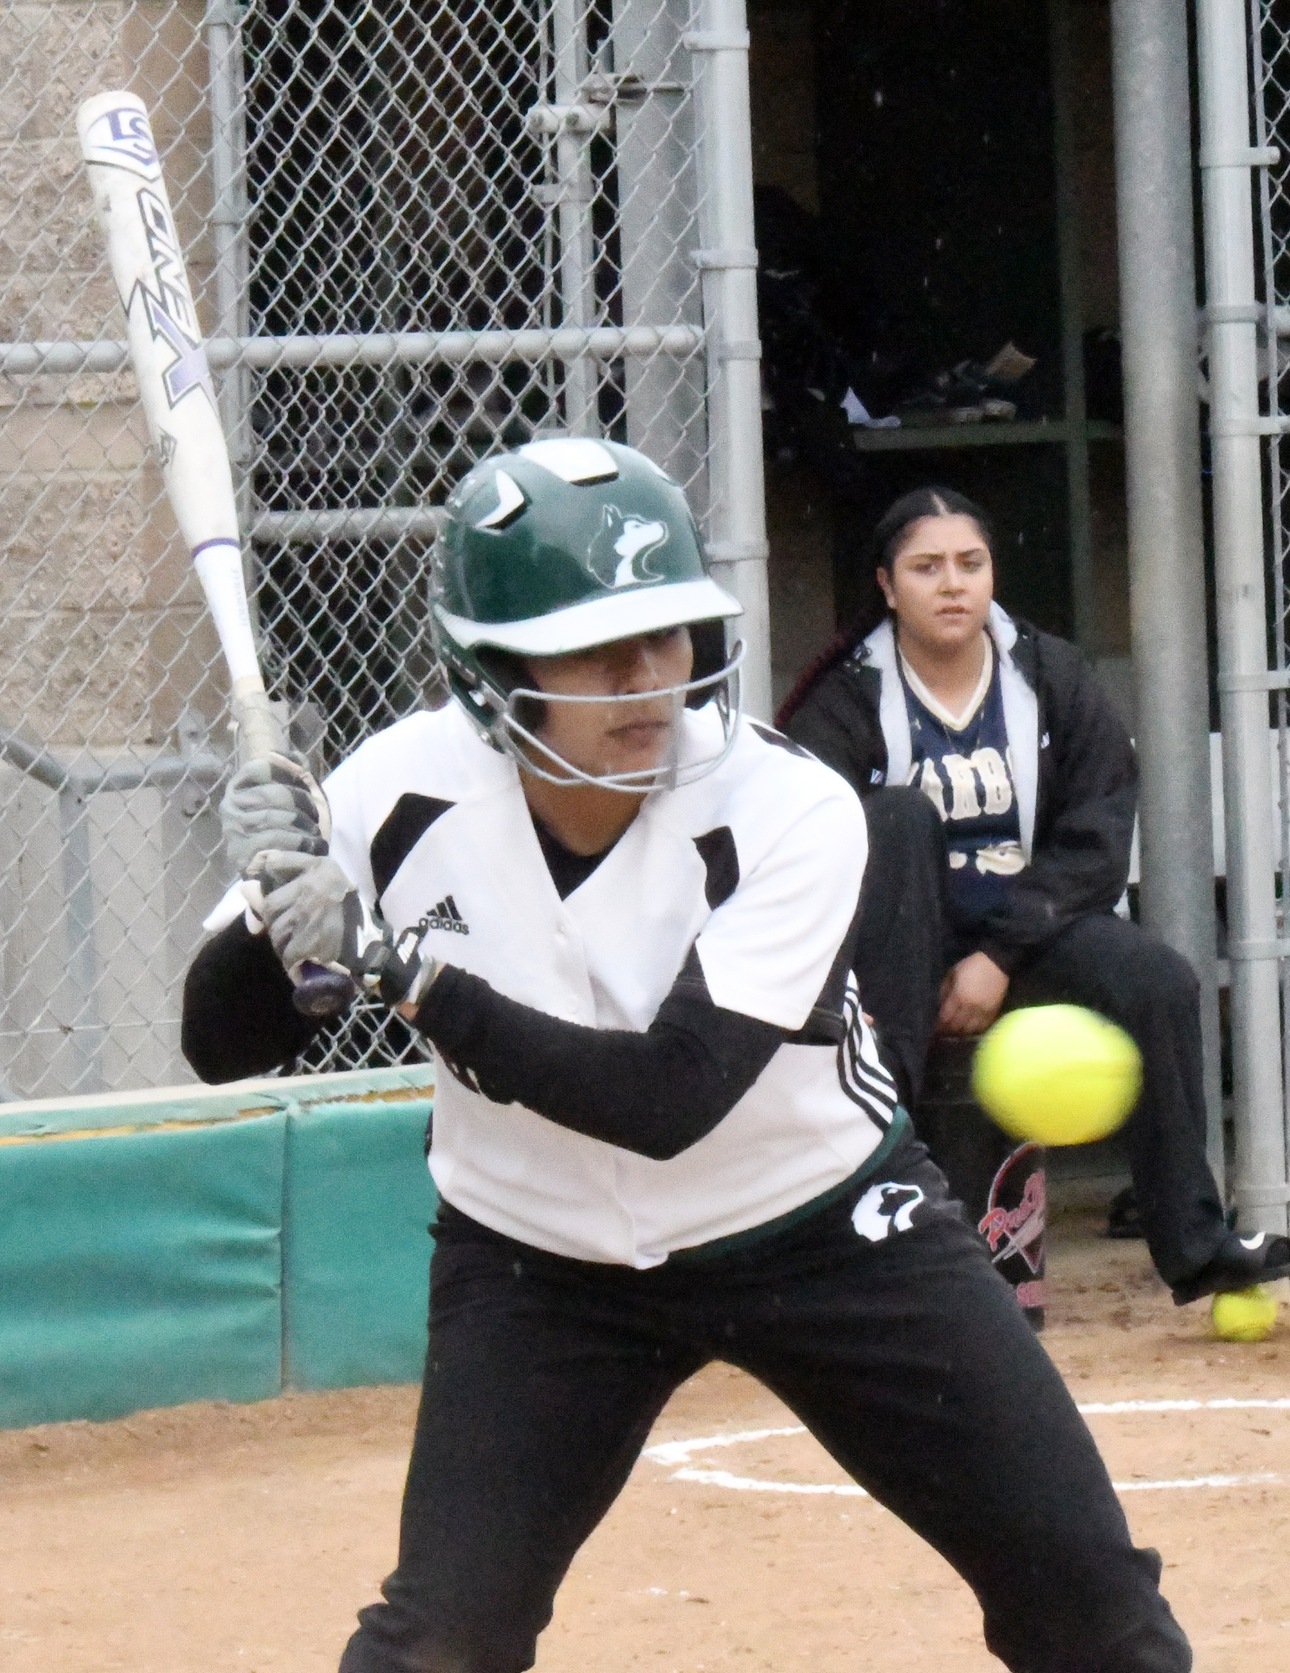 East Los Angeles College short stop Angelina Gonzalez (pictured) singled twice in a Husky loss to No. 7 Southern California-ranked El Camino College. (photo by DeeDee Jackson)